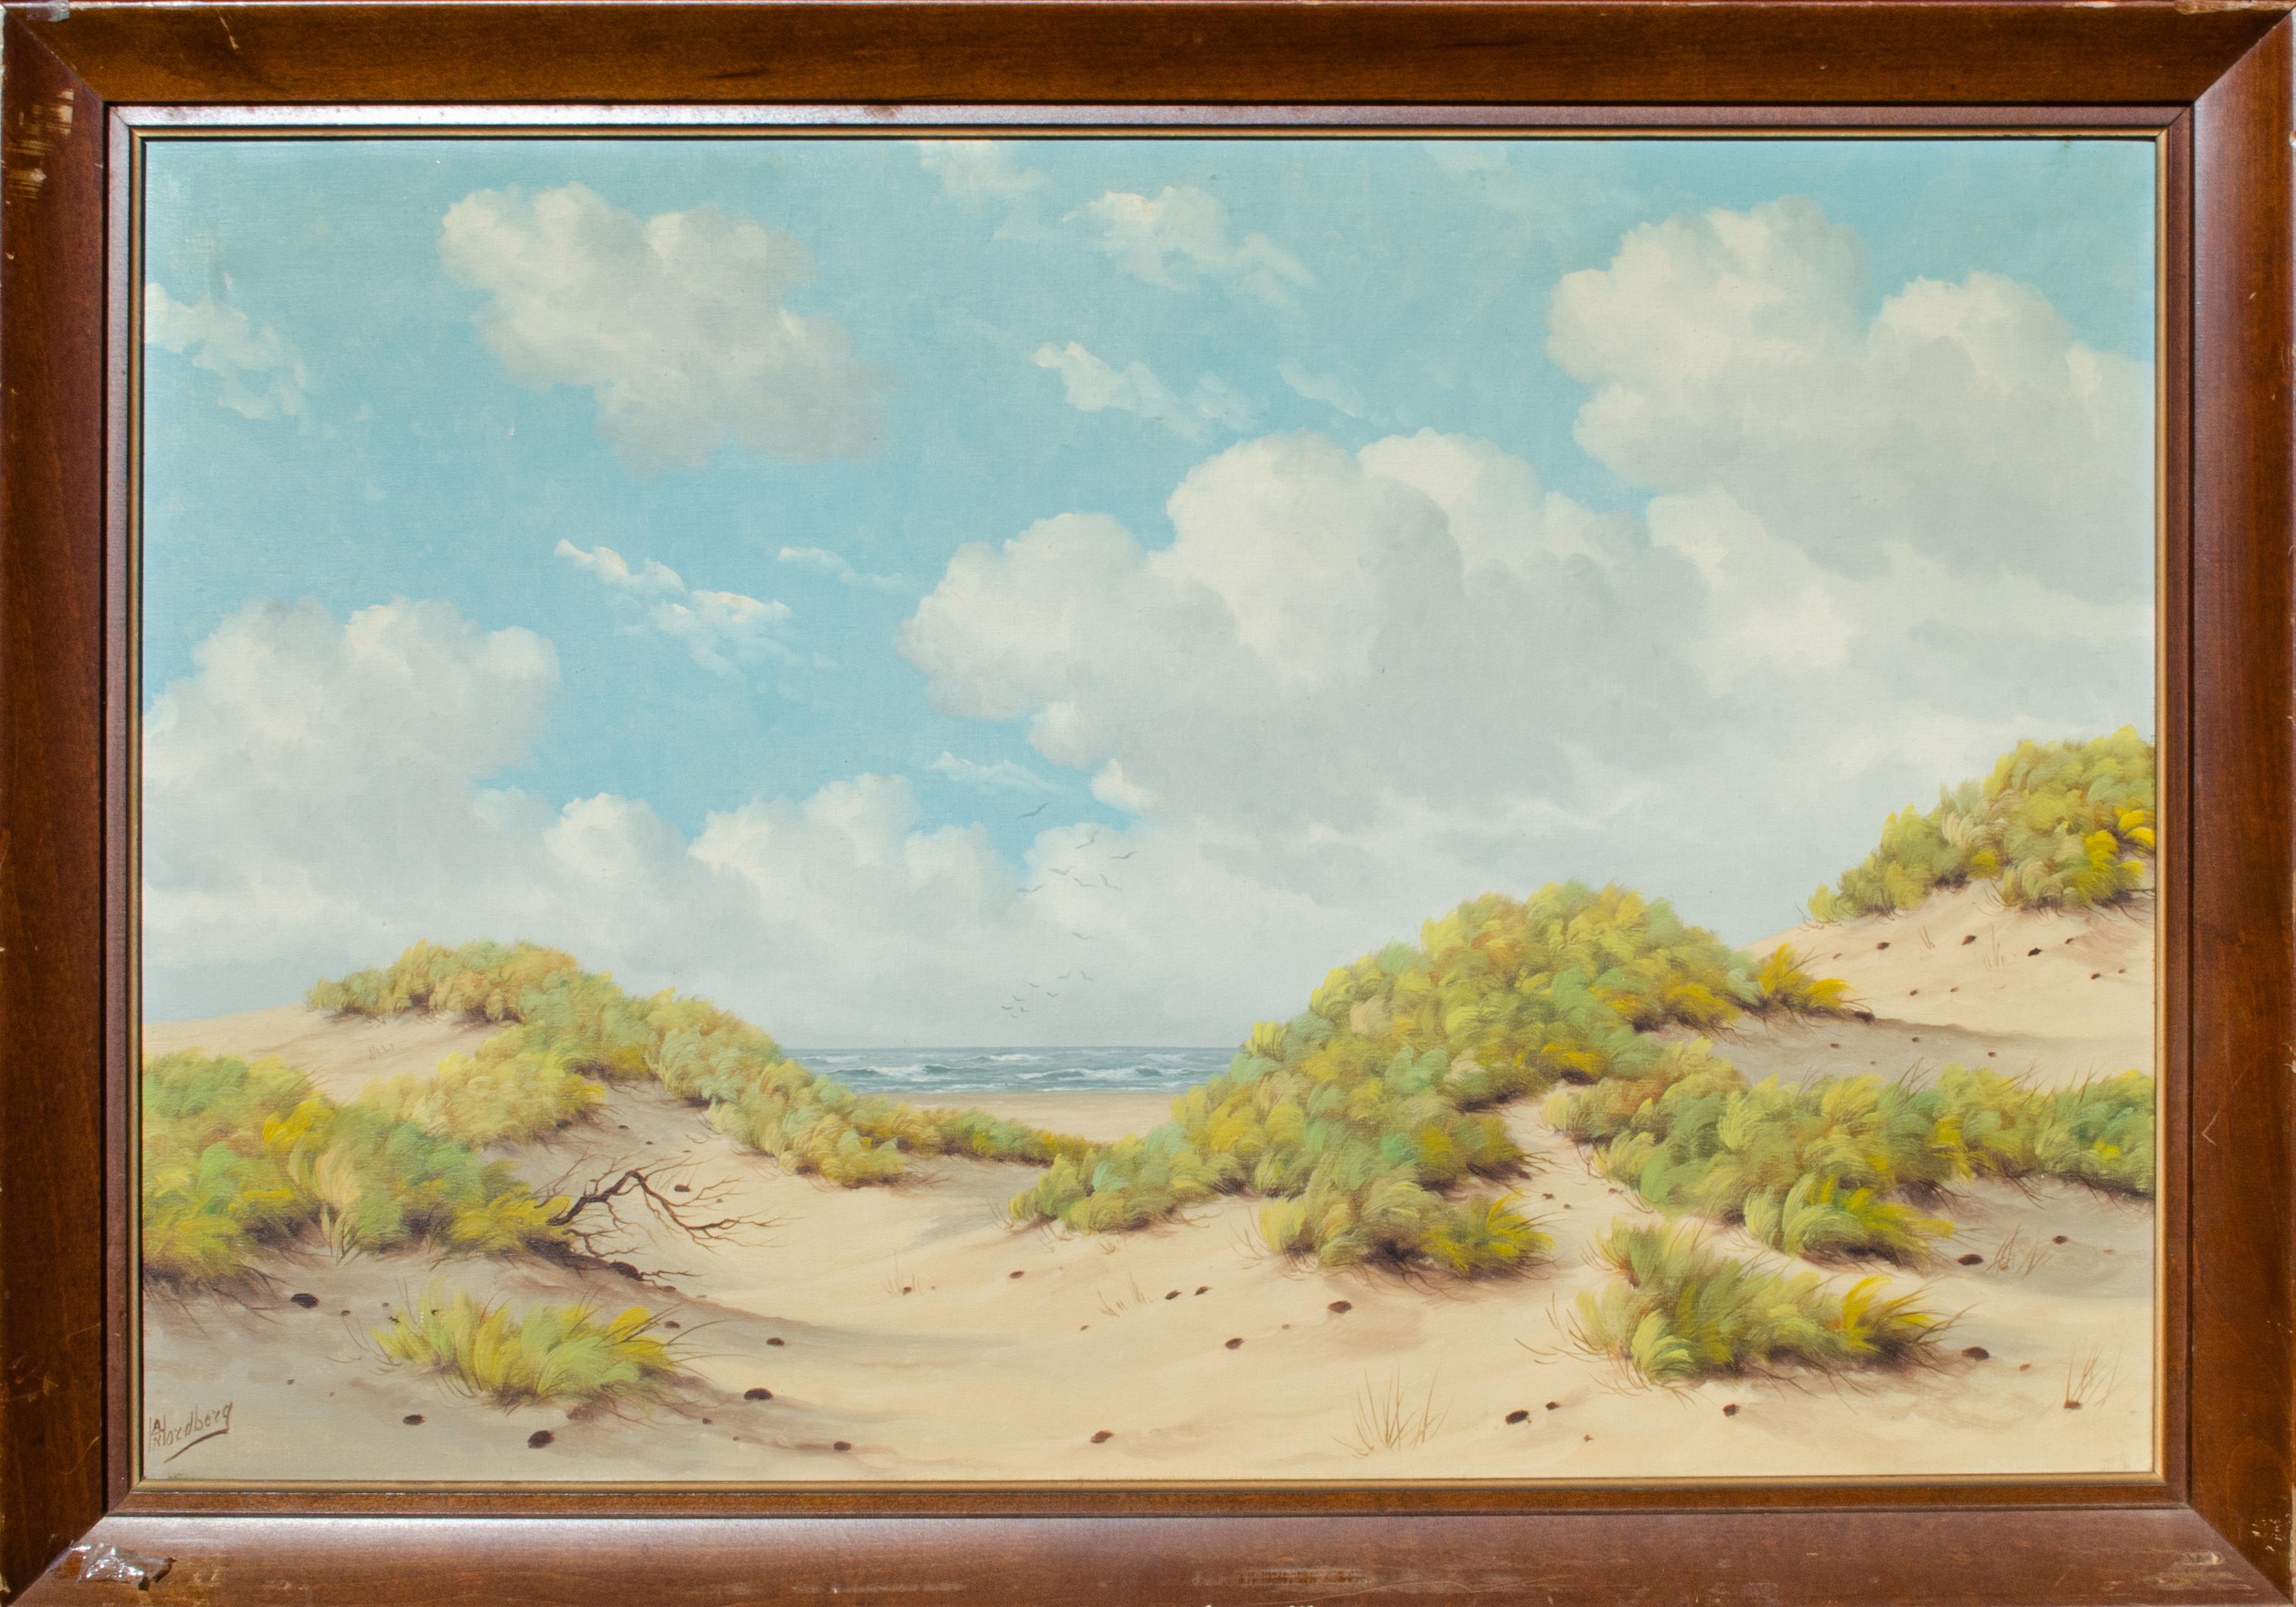 A.H. Nordberg (Swedish-American)
Untitled, 20th Century
Oil on canvas
24 x 36 in.
Framed: 28 x 39 3/4 x 1 3/4 in.
Signed lower left

A.H. Nordberg was a known Swedish painter who was active in the 20th century. He was known for his sand dunes